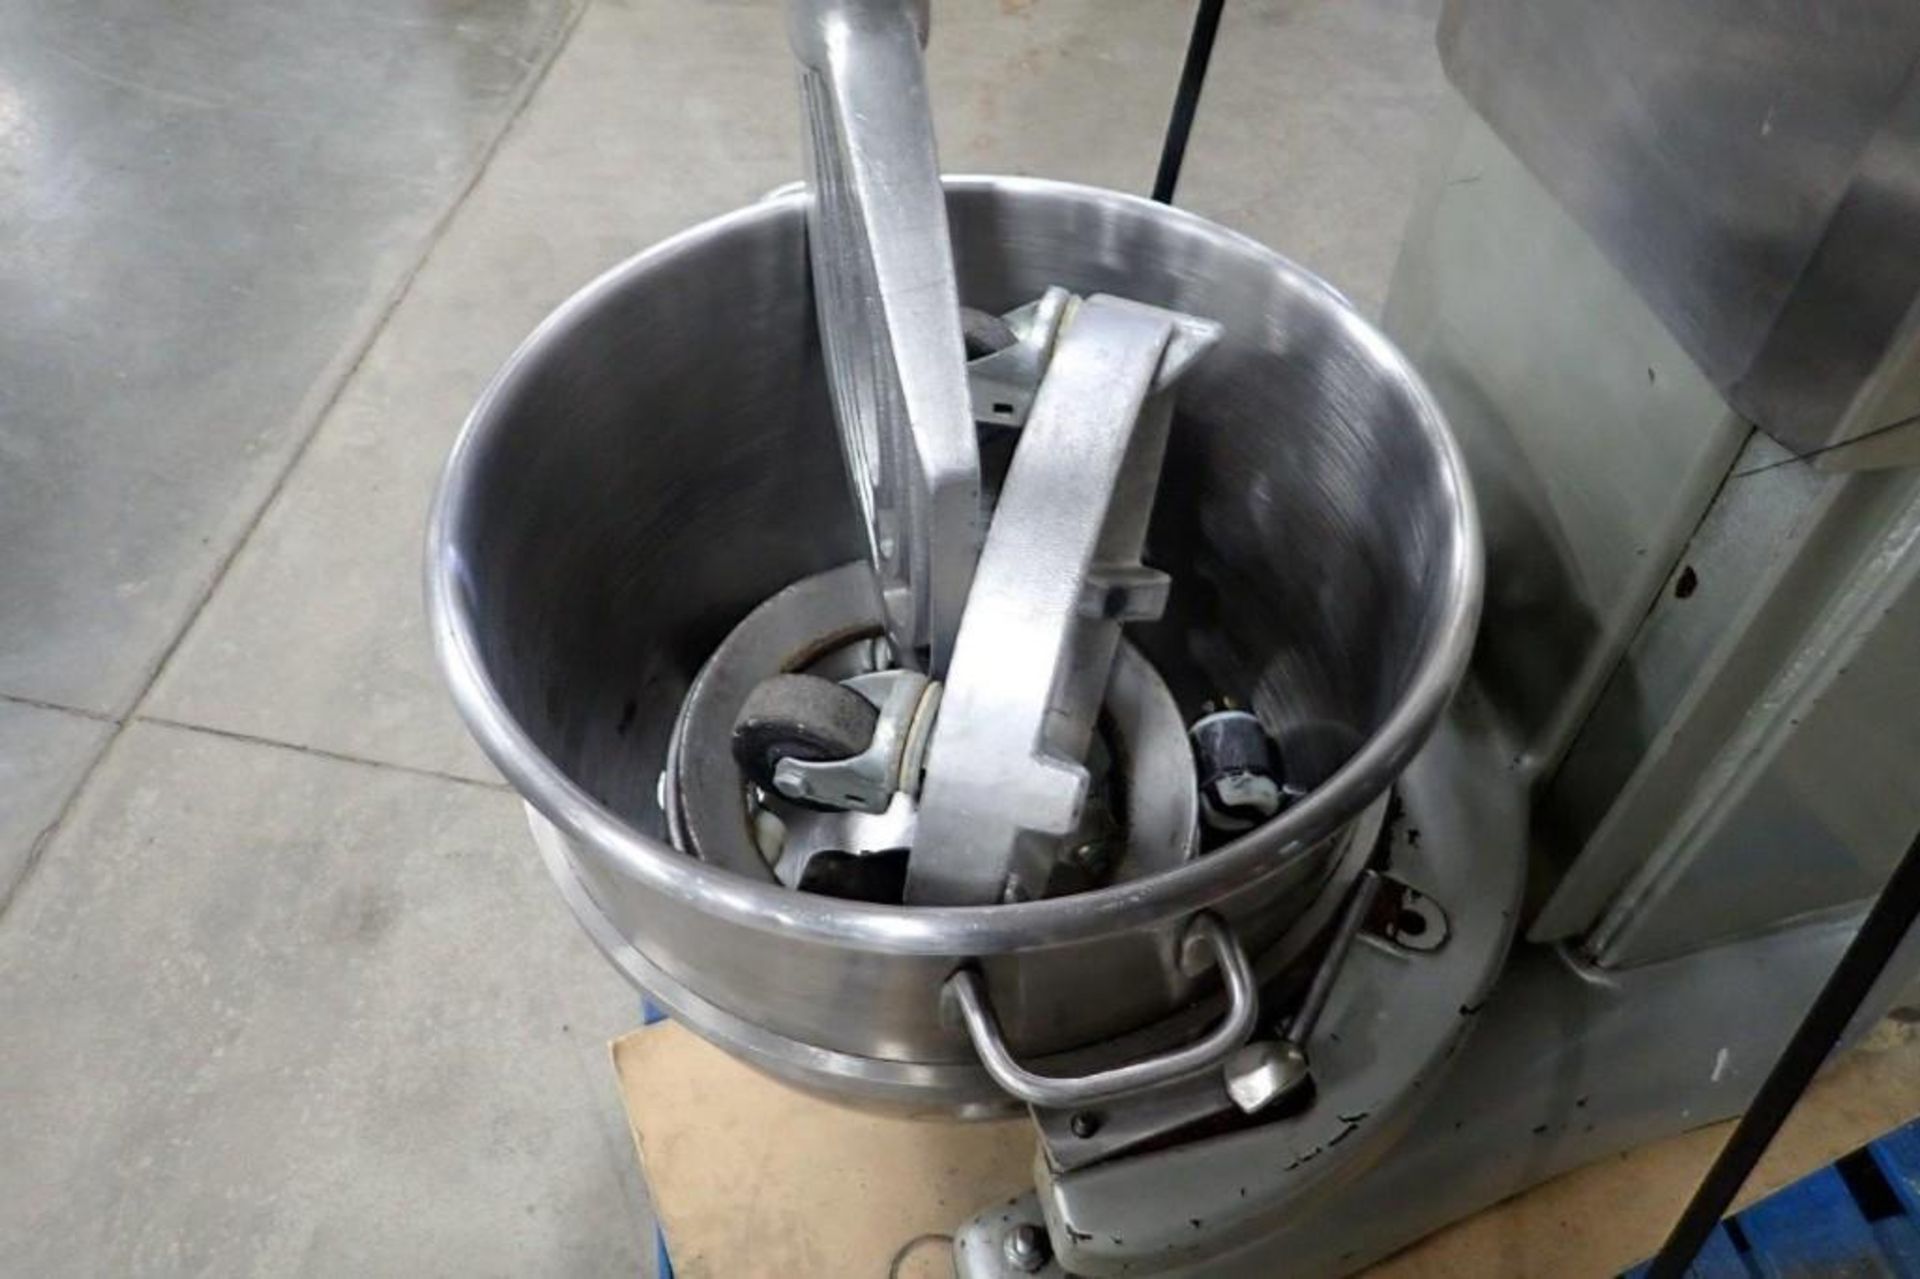 Hobart 80 qt mixer, Model M-802, SN 11-183-405, with SS bowl, 2 bowl dollies, beater attachment (Loc - Image 5 of 9